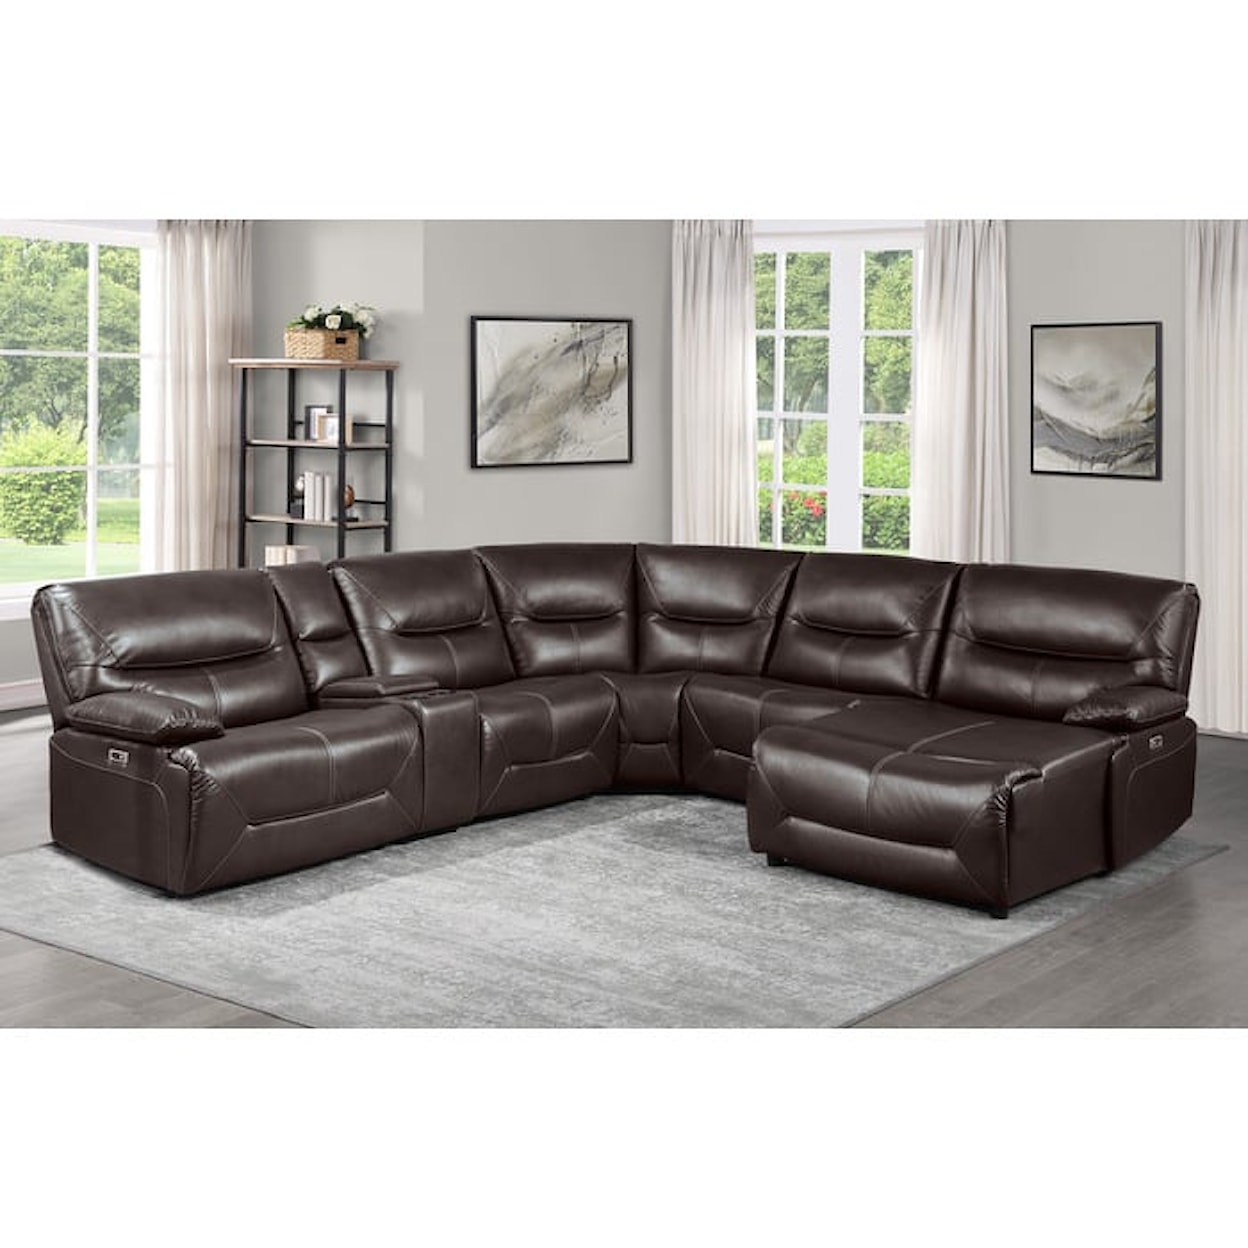 Homelegance Dyersburg Power Right Side Reclining Chaise